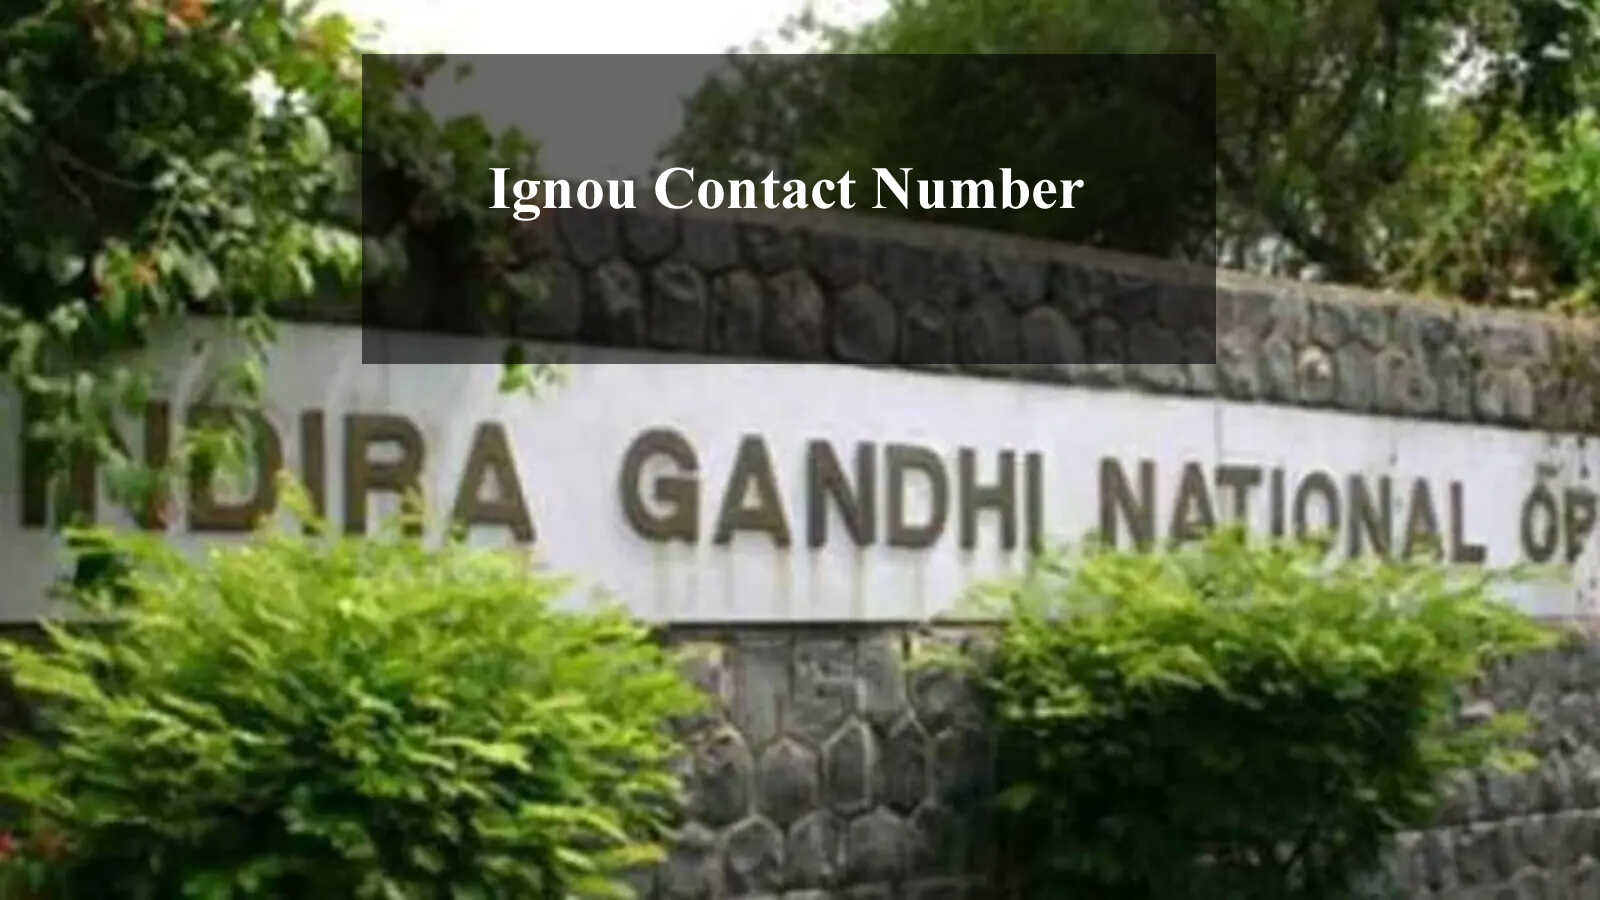 Ignou Contact Number